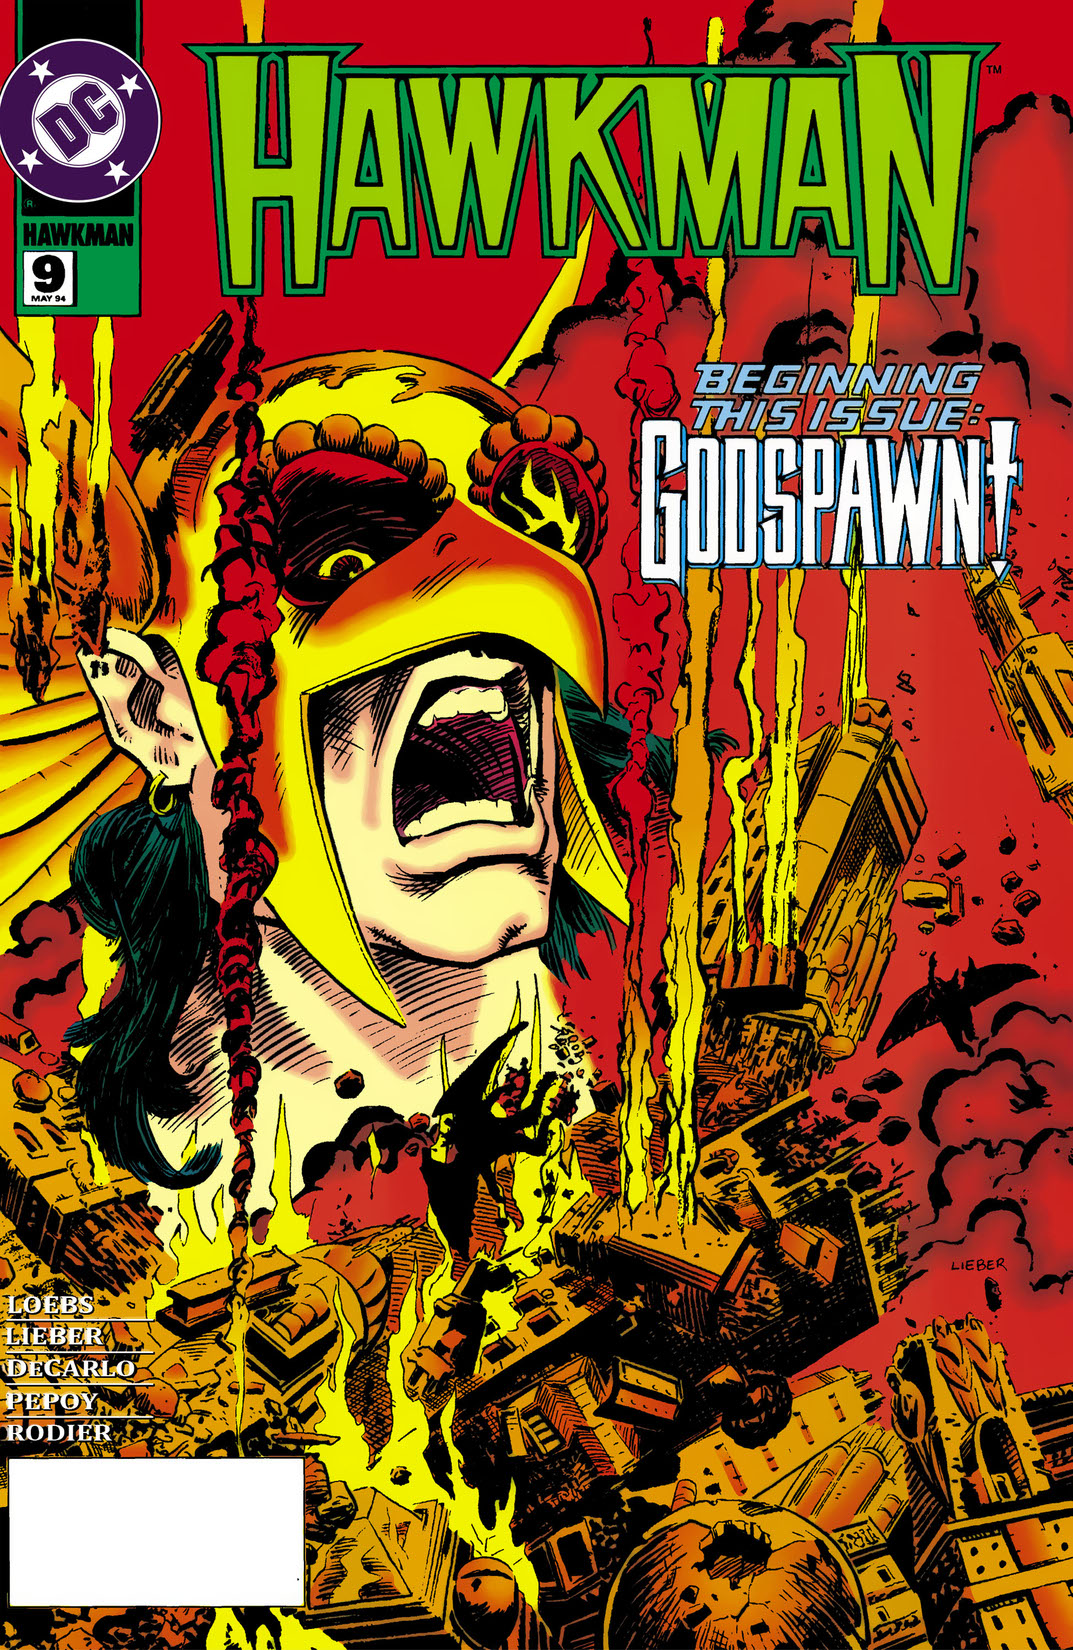 Hawkman (1993-) #9 preview images